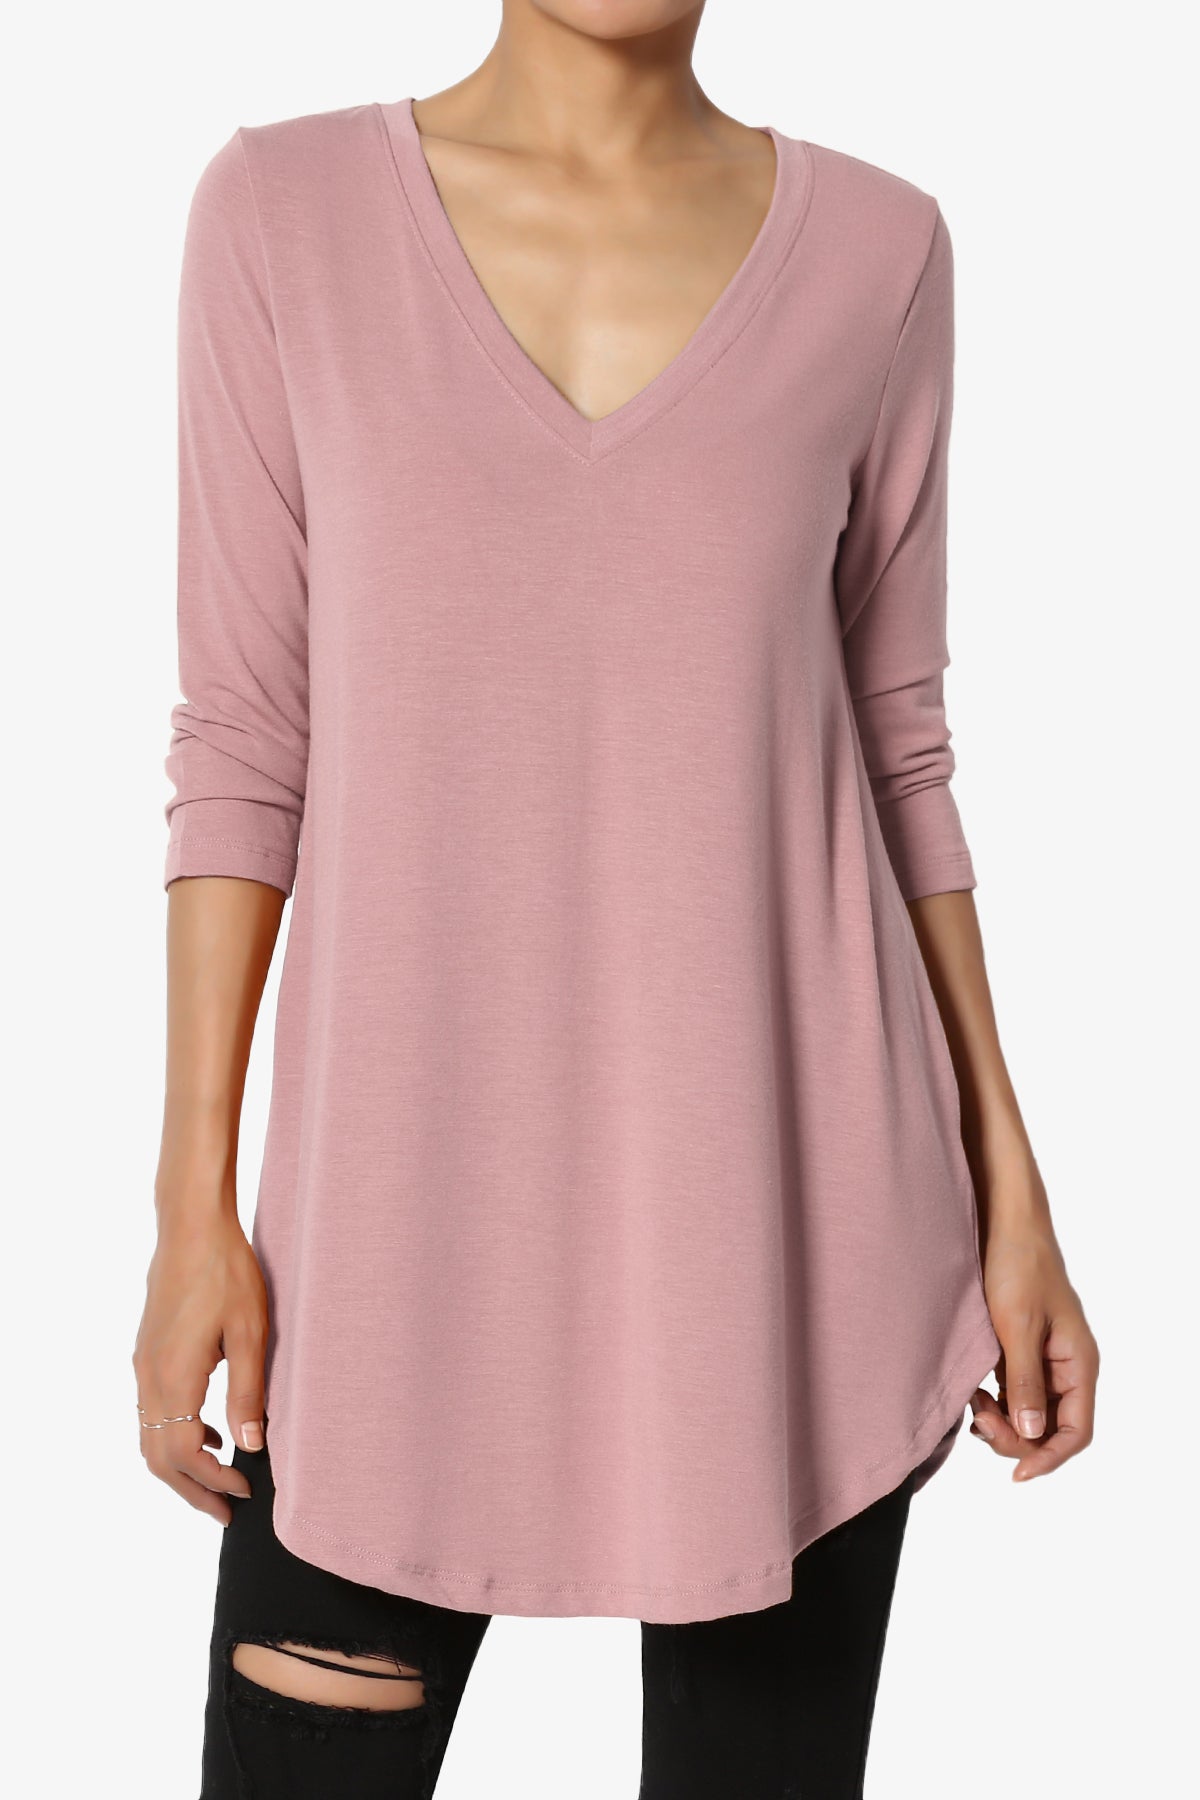 Load image into Gallery viewer, Ramada 3/4 Sleeve Flowy Jersey Top LIGHT ROSE_1
